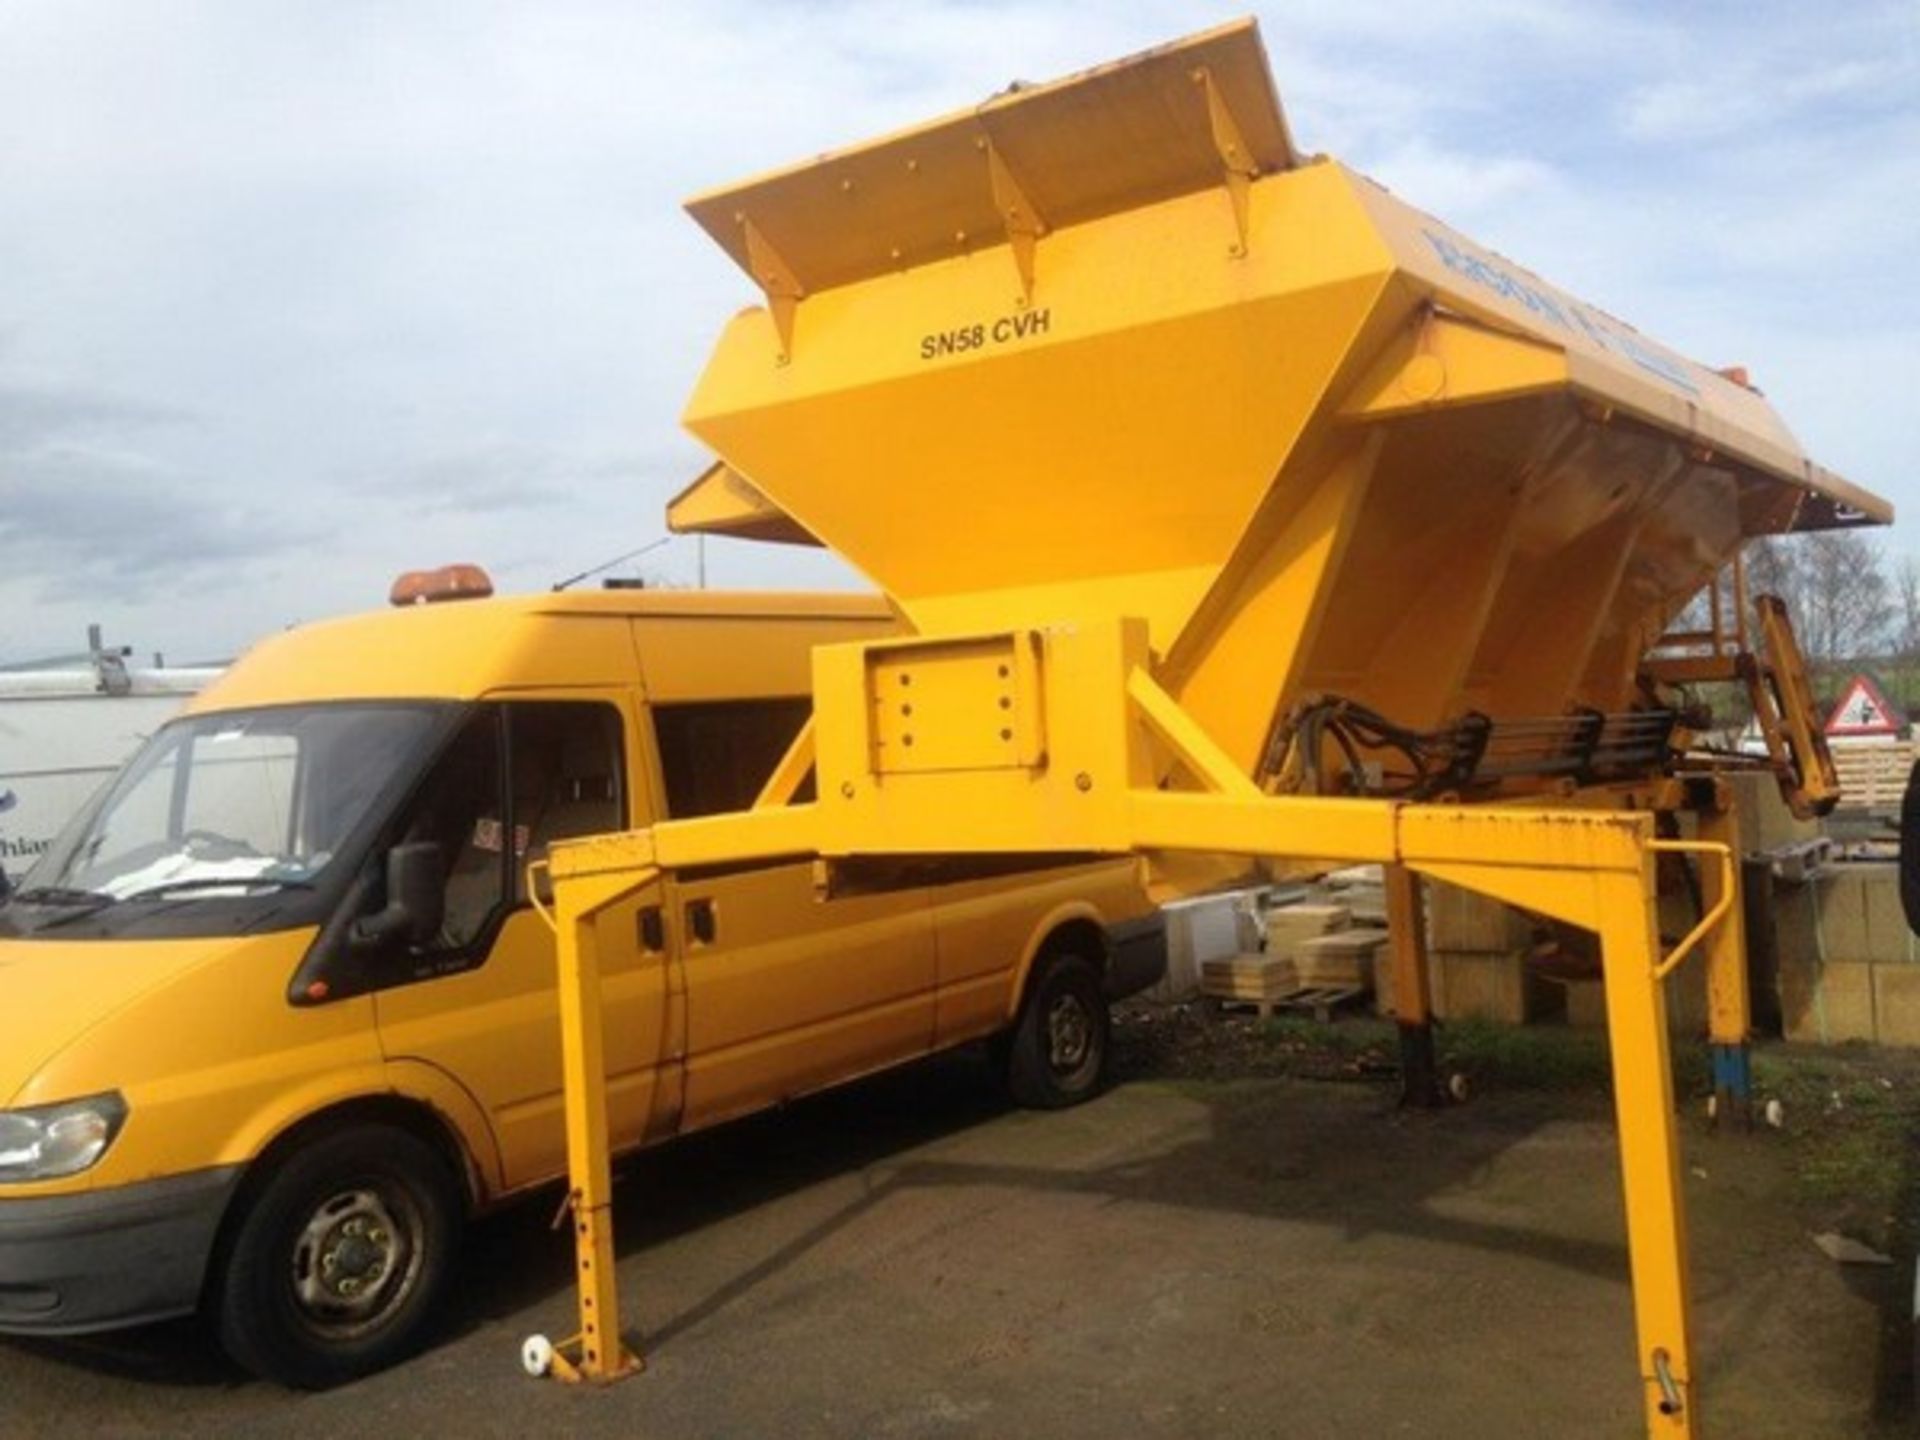 2004 ECON WZCQHJ46 body gritter s/n 37770 Reg No SN58 CVH (861) **To be sold from Errol auction s - Image 5 of 12